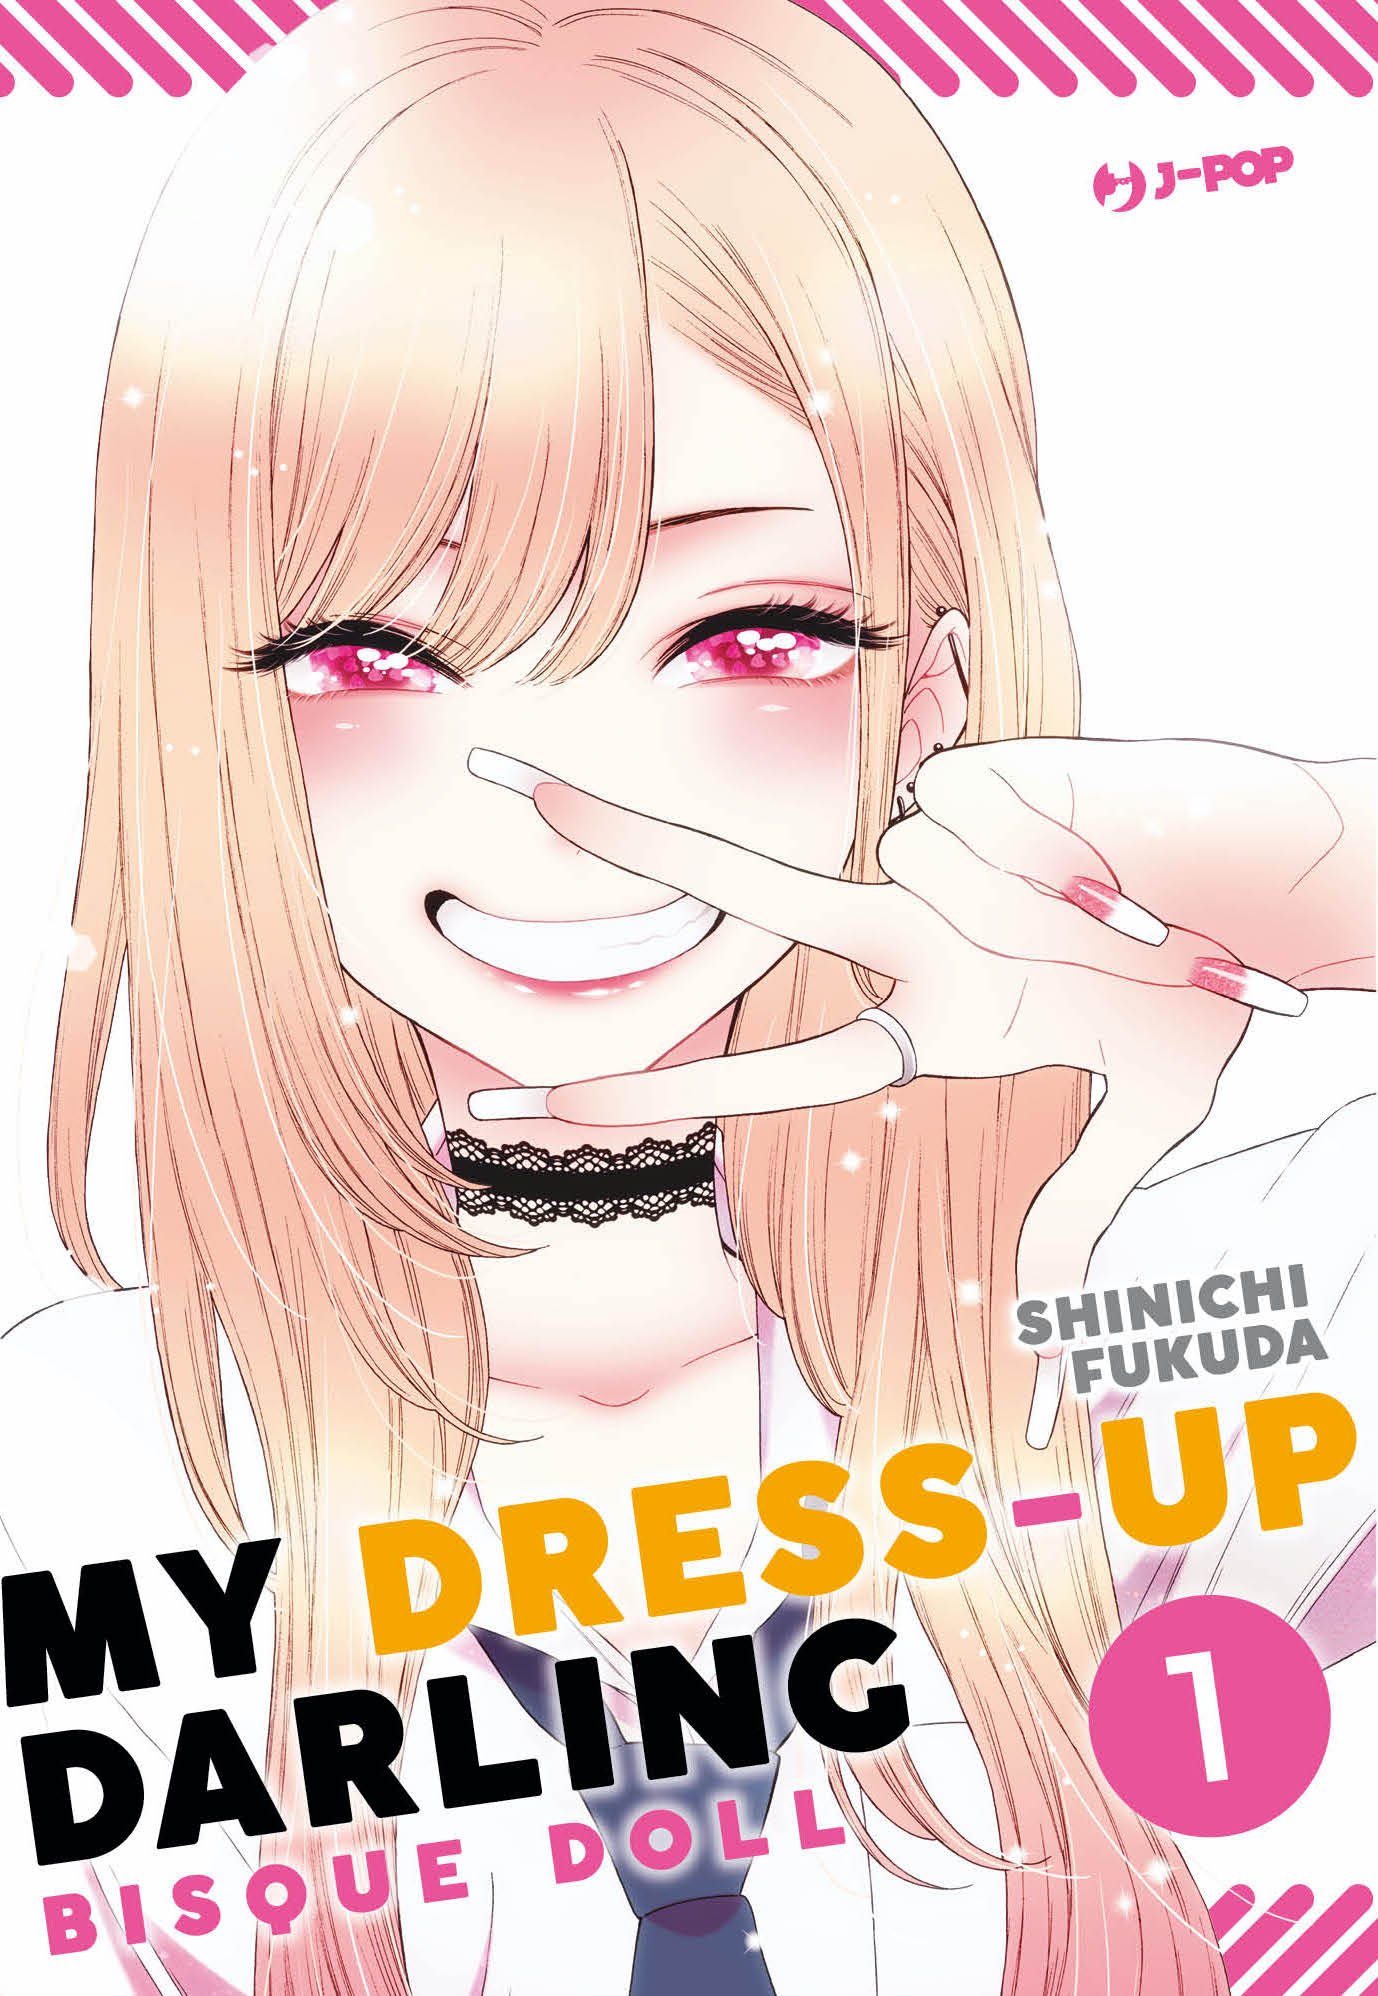 My Dress-up darling. Bisque Doll! 1, tra le uscite J-POP Manga del 26 gennaio 2022